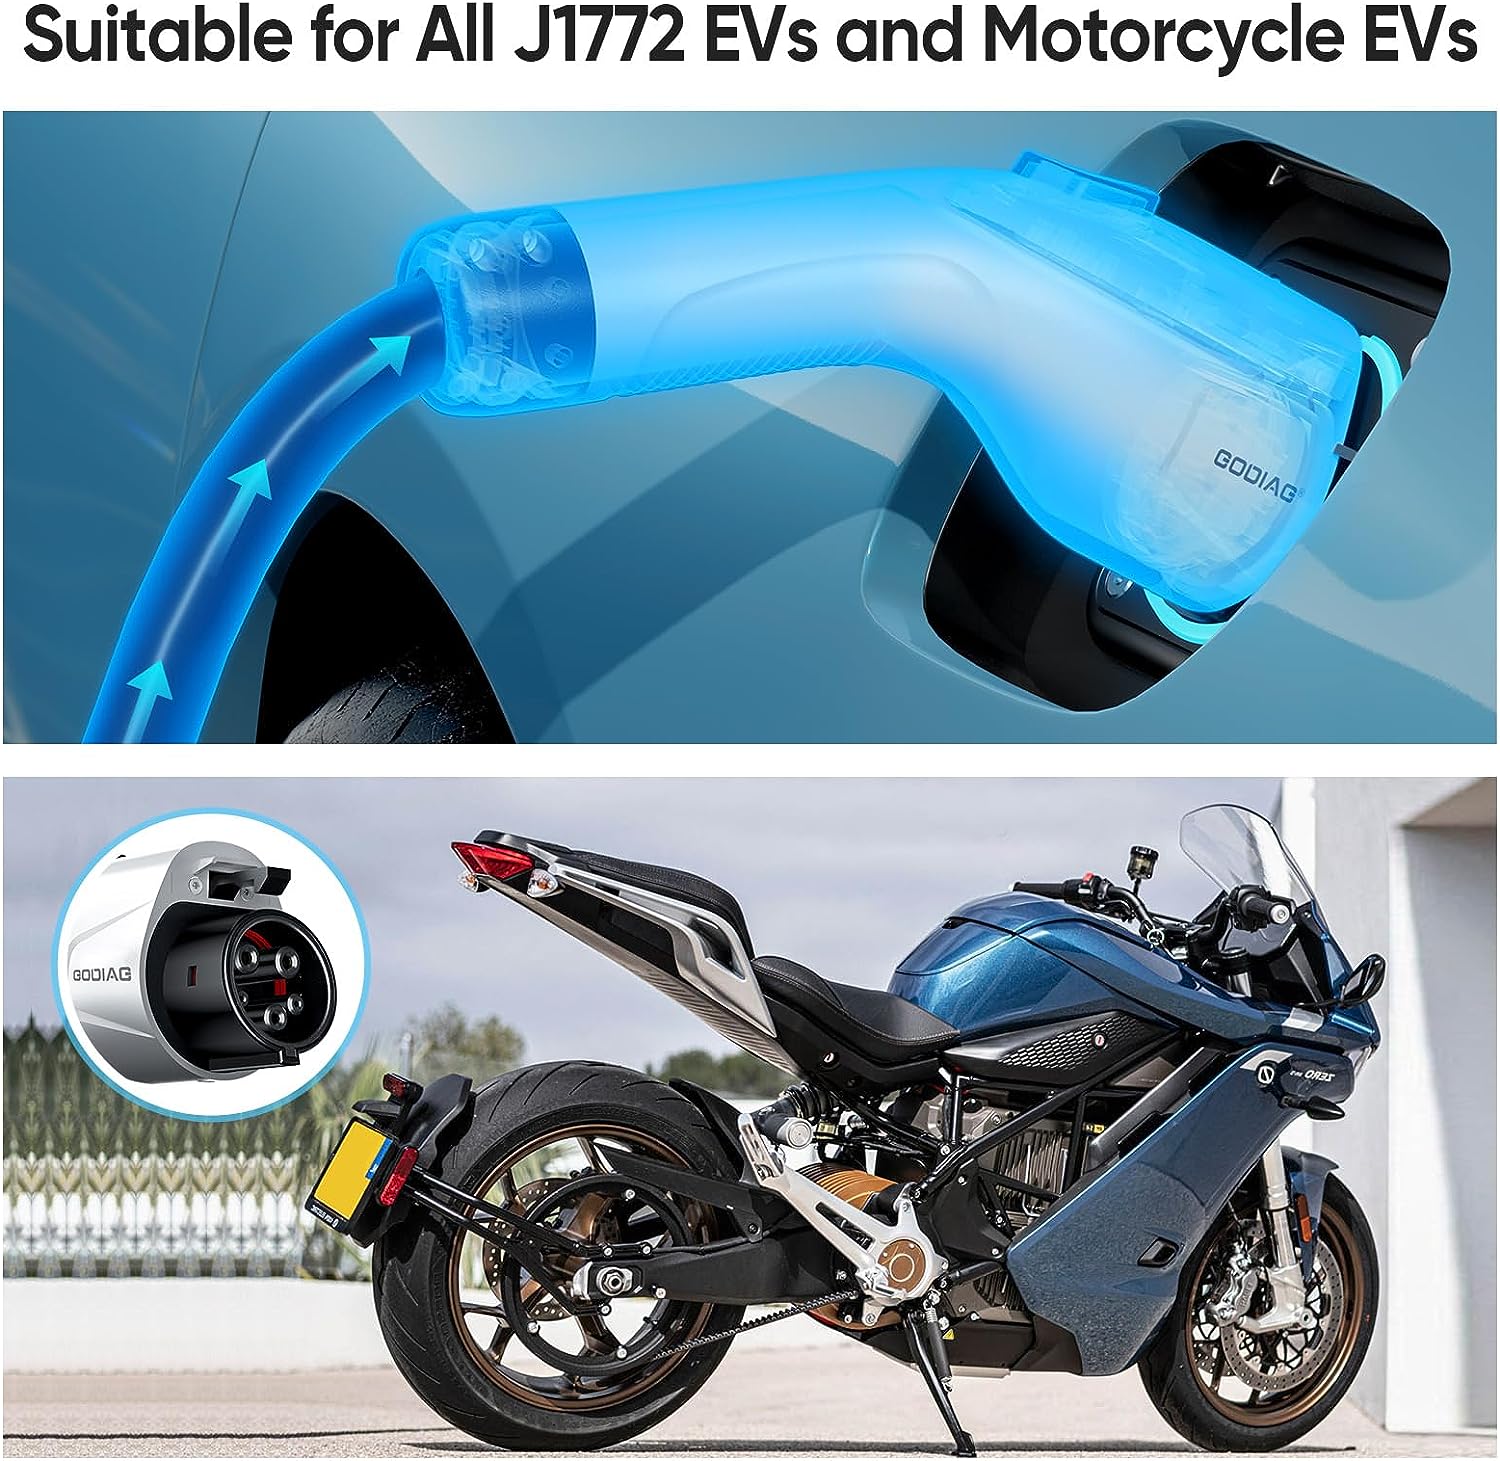 level-2-ev-charger-suitable-for-all-j1772-evs-and-motorcycle-evs